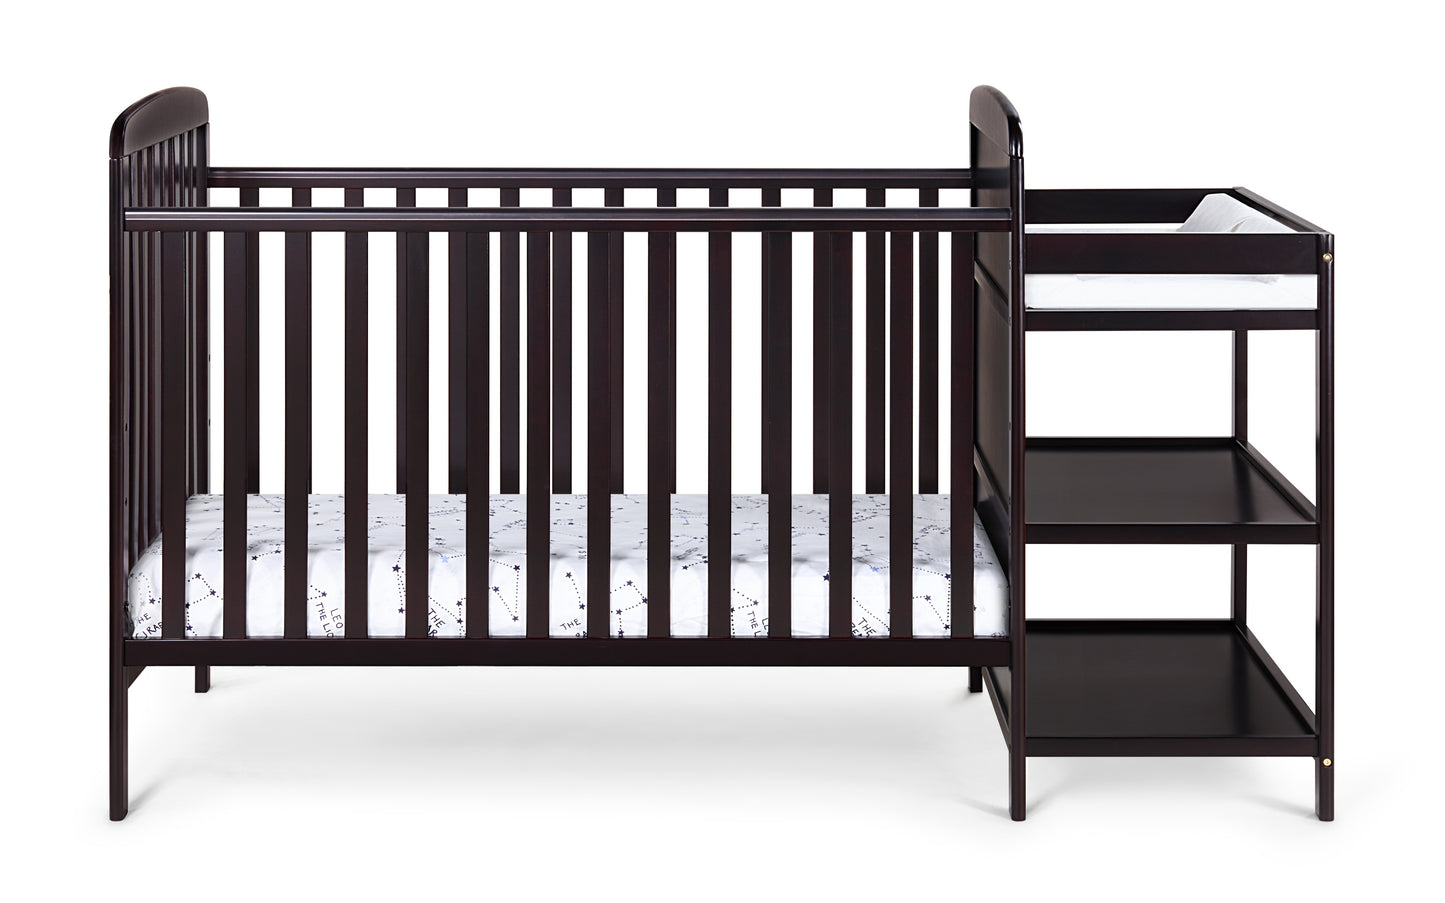 Ramsey 3-in-1 Convertible Crib and Changer Combo Espresso